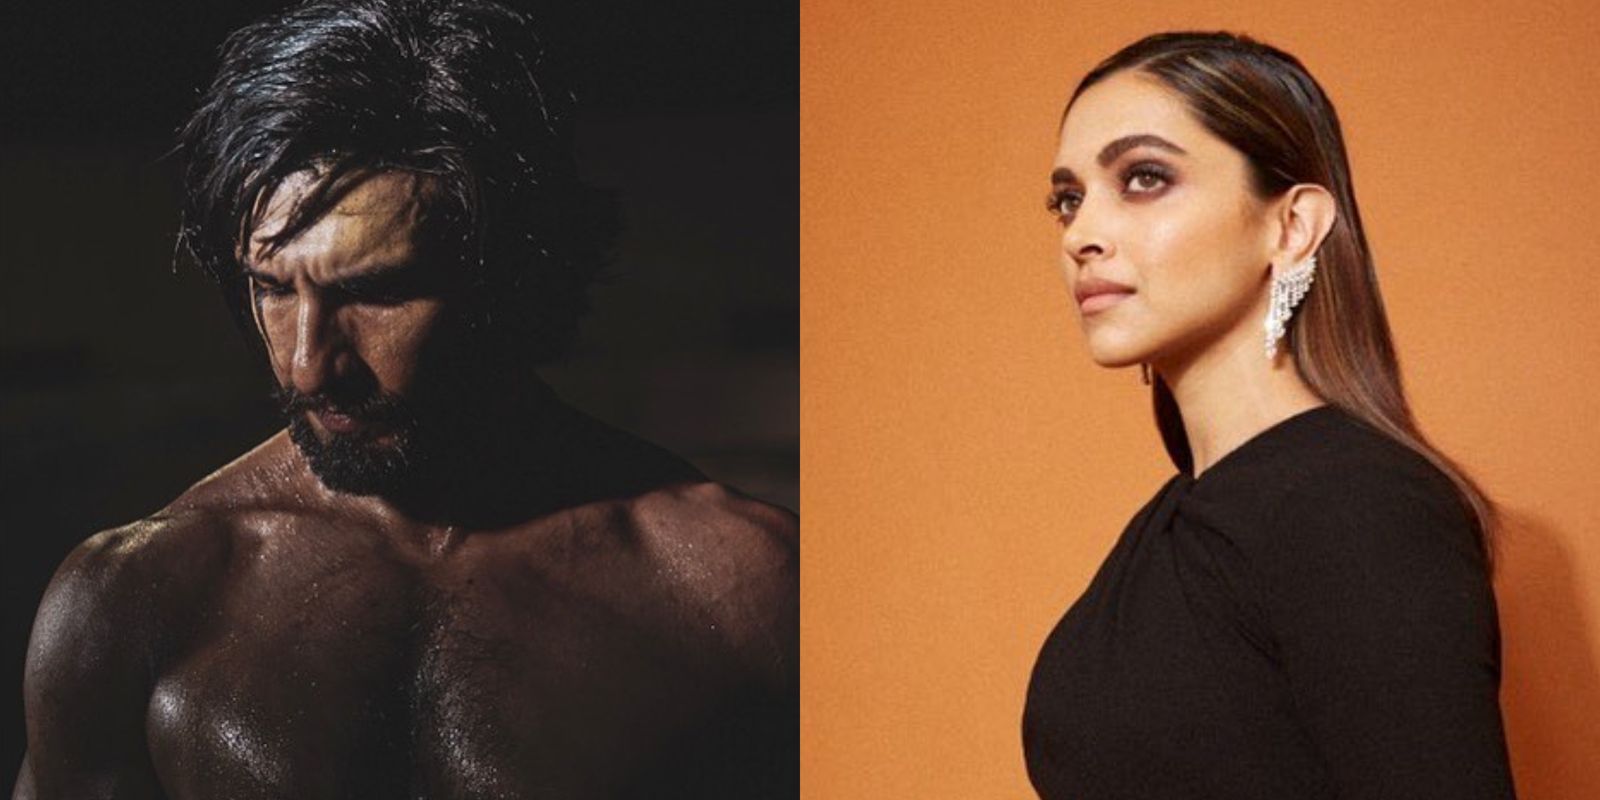 Ranveer Singh Flaunts His Chiseled Physique In Latest Post; Wife Deepika Padukone Leaves An Interesting Comment